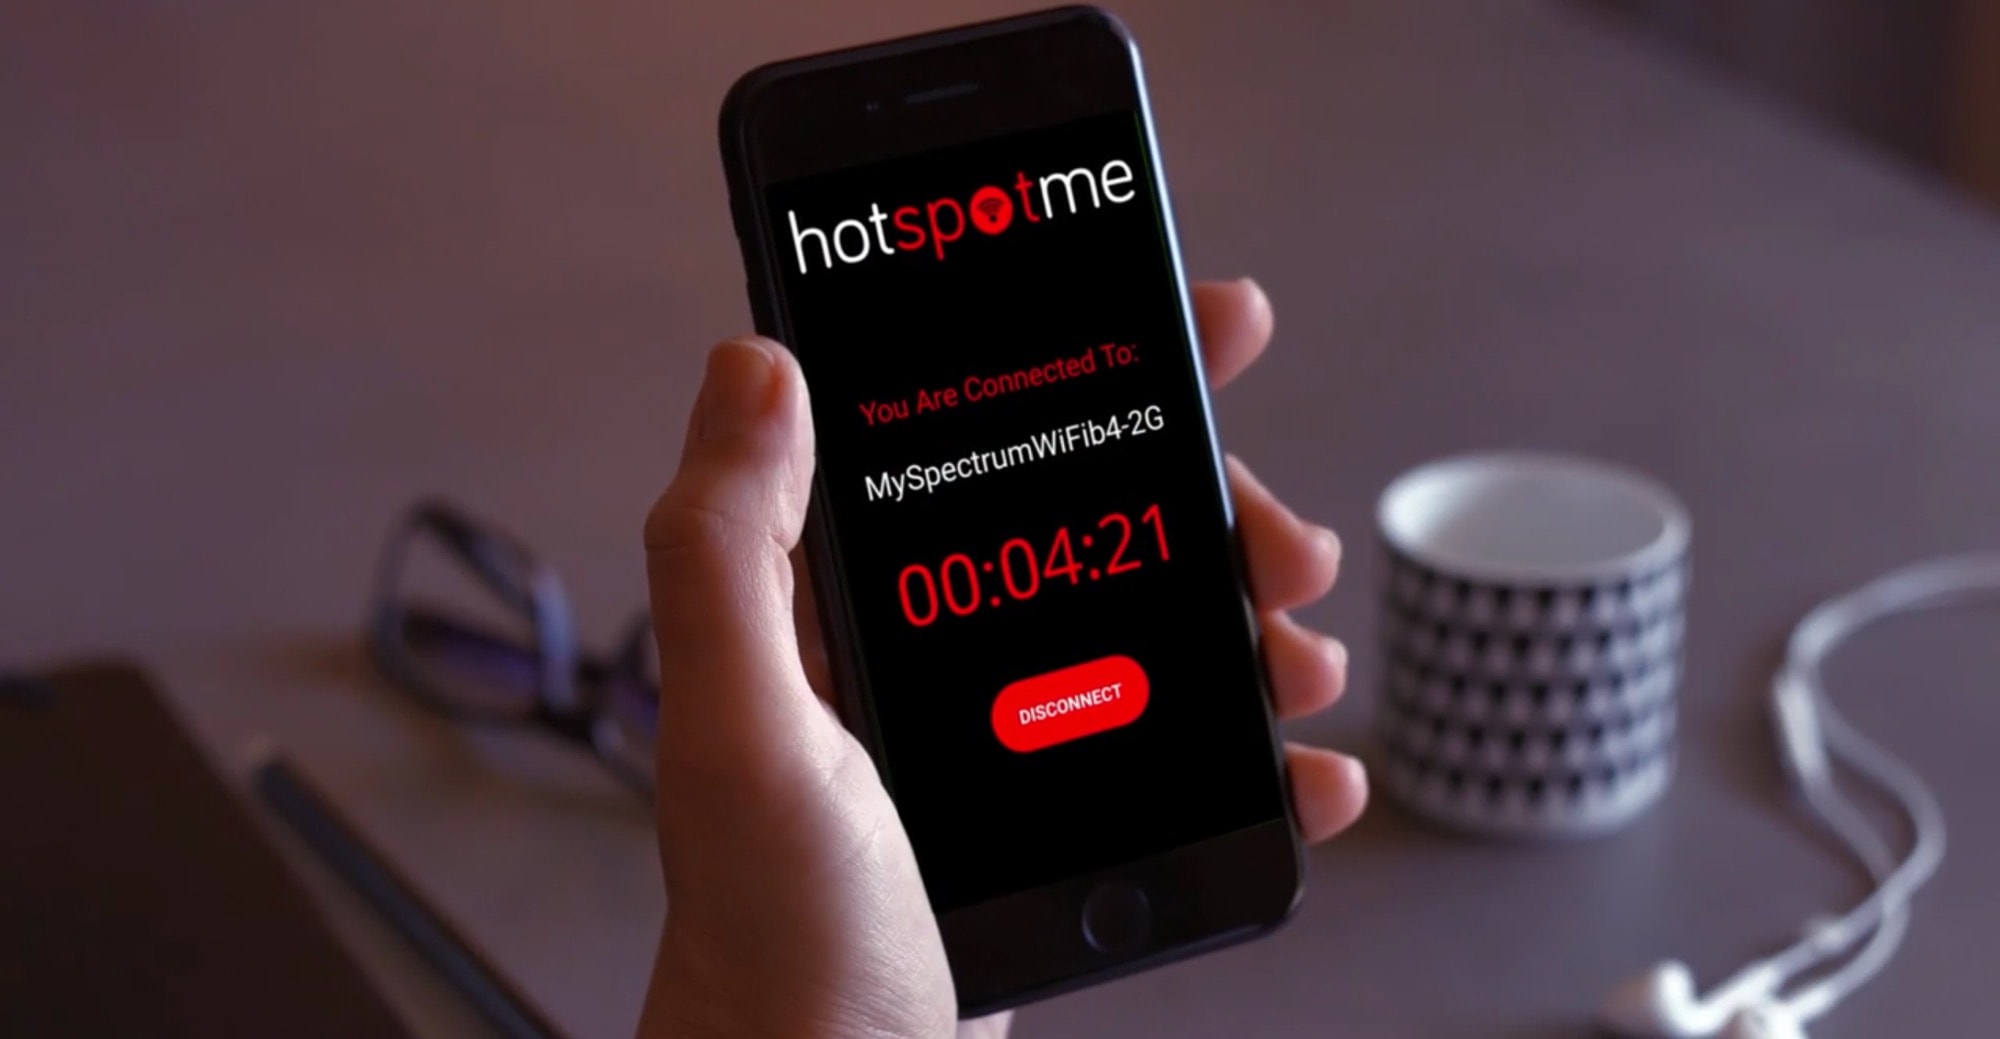 HotSpotMe lets you share your Wi-Fi hotspot with anyone.